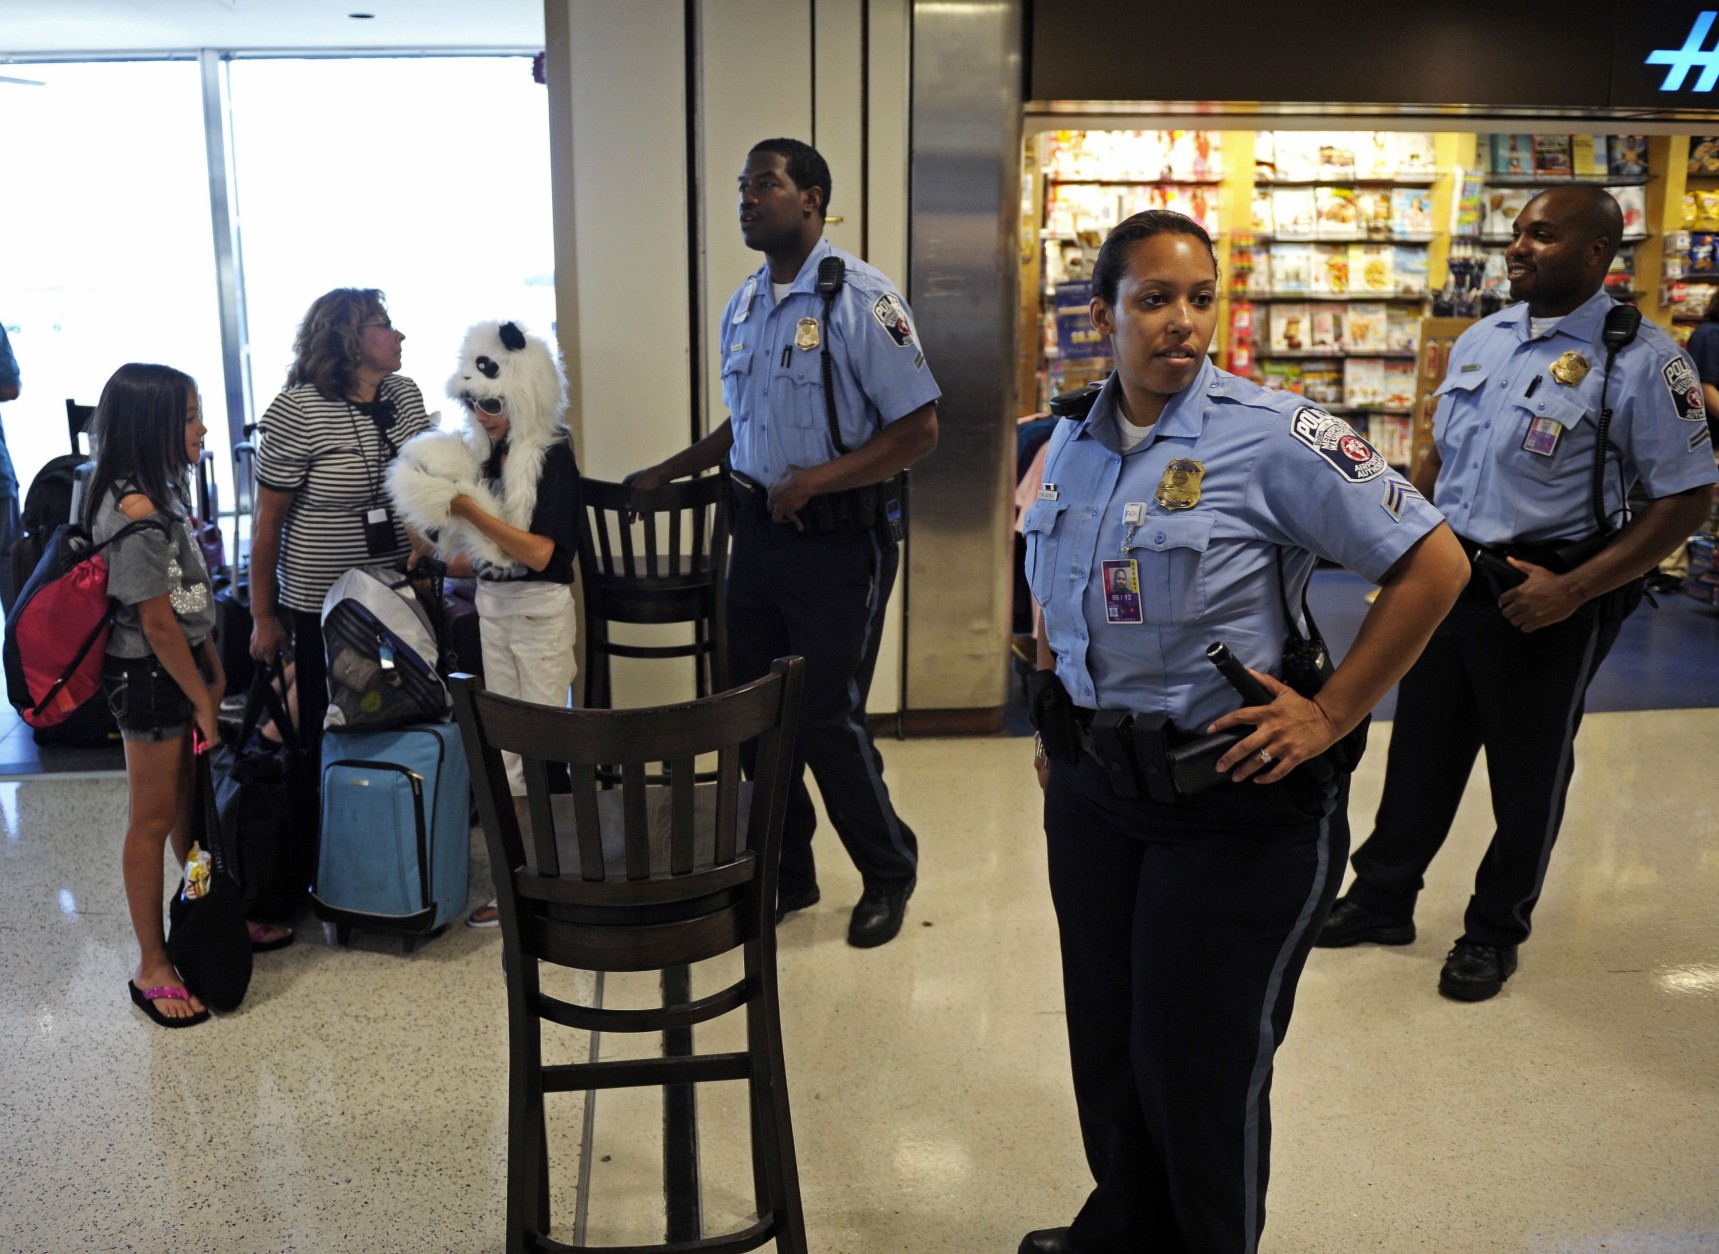 Ronald Reagan National Airport Police stop travelers from entering Terminal A, Tuesday, Aug. 23, 2011, as authorities checked for damage after an earthquake in the Washington area. A 5.9 magnitude earthquake centered in Virginia forced evacuations of all the monuments on the National Mall in Washington and rattled nerves from Georgia to Martha's Vineyard, the Massachusetts island where President Barack Obama is vacationing. No injuries were immediately reported.  (AP Photo/Cliff Owen)